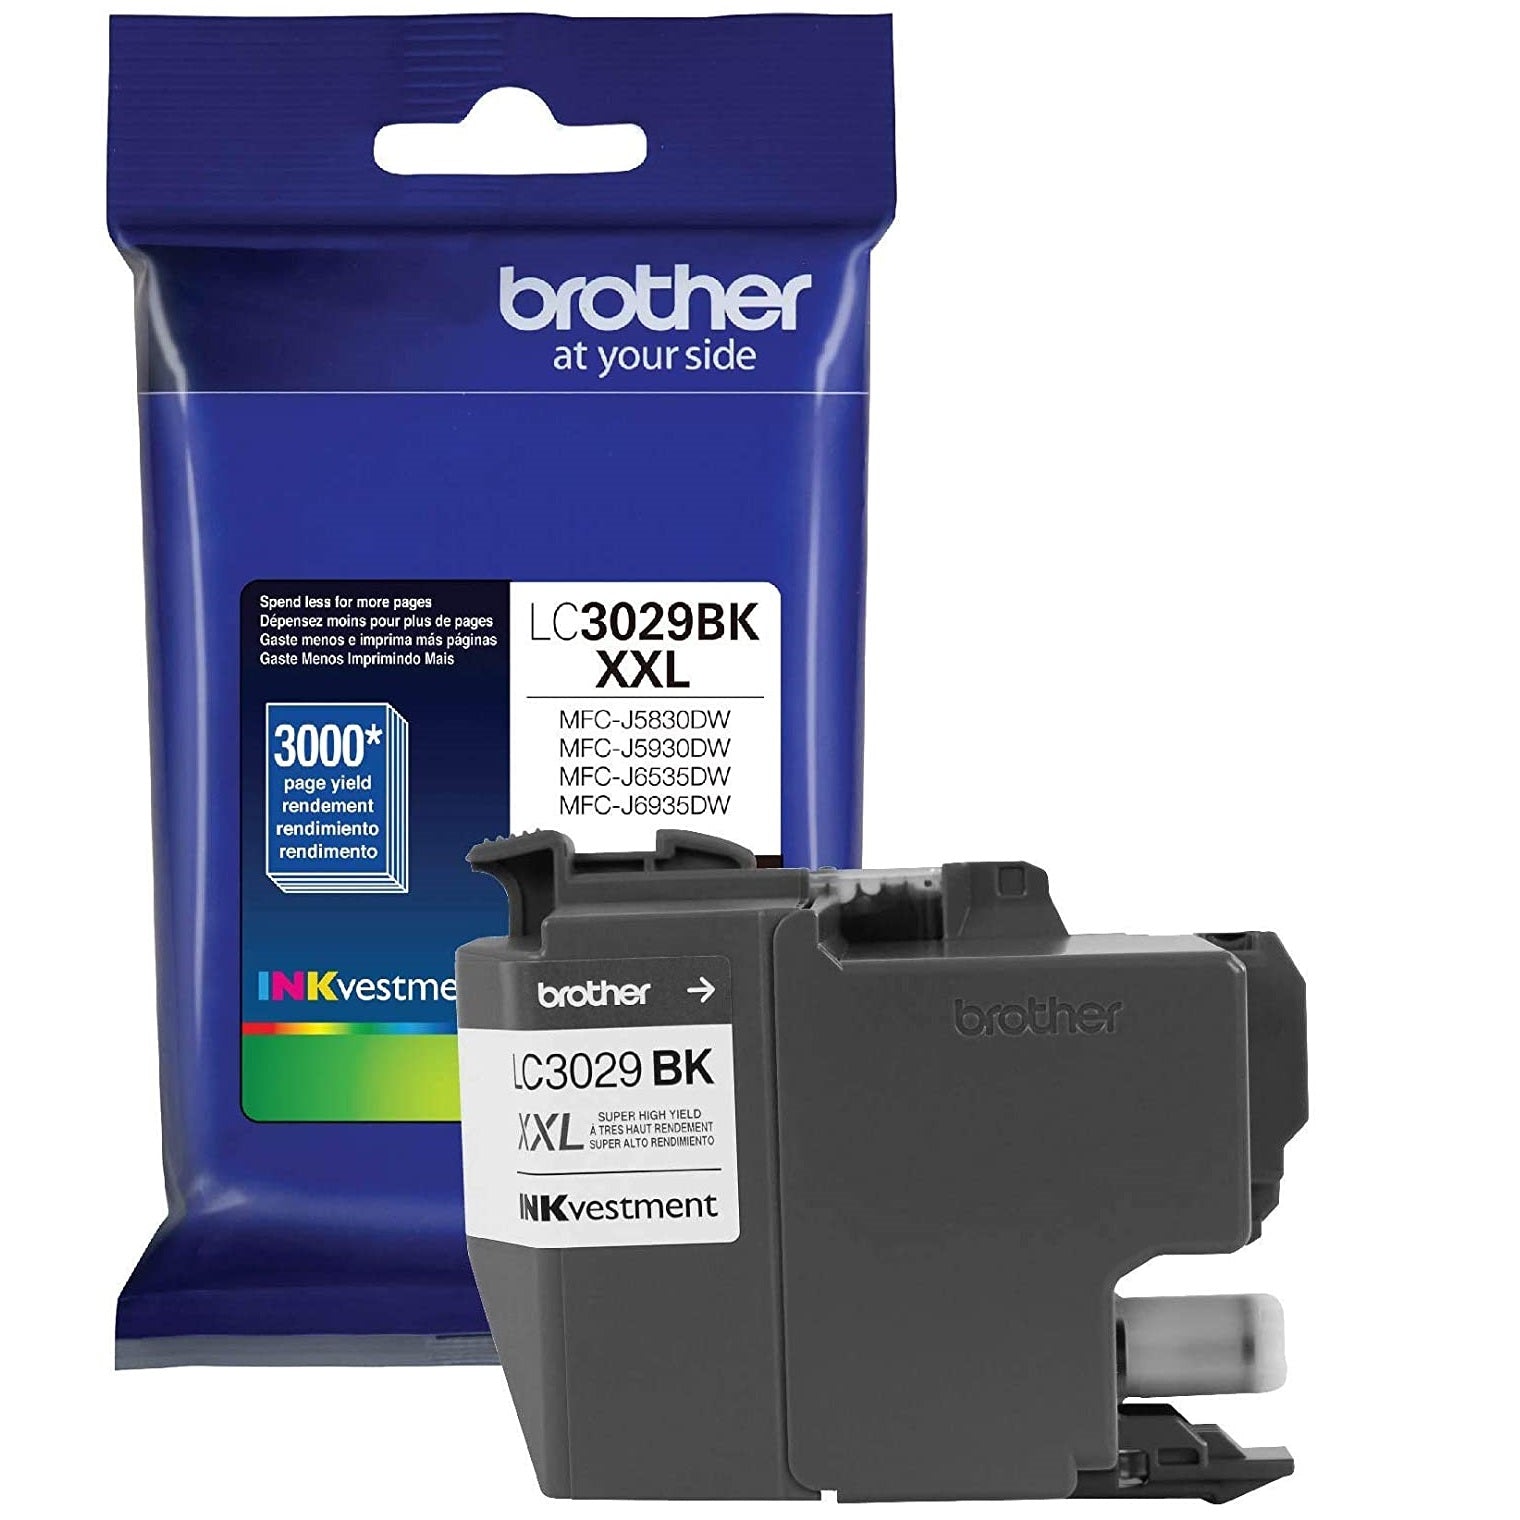 Absolute Toner Brother Genuine LC3029BK Super High Yield Black Ink Cartridge - LC3029BKS, Page Yield Up To 3000 Pages Original Brother Cartridges